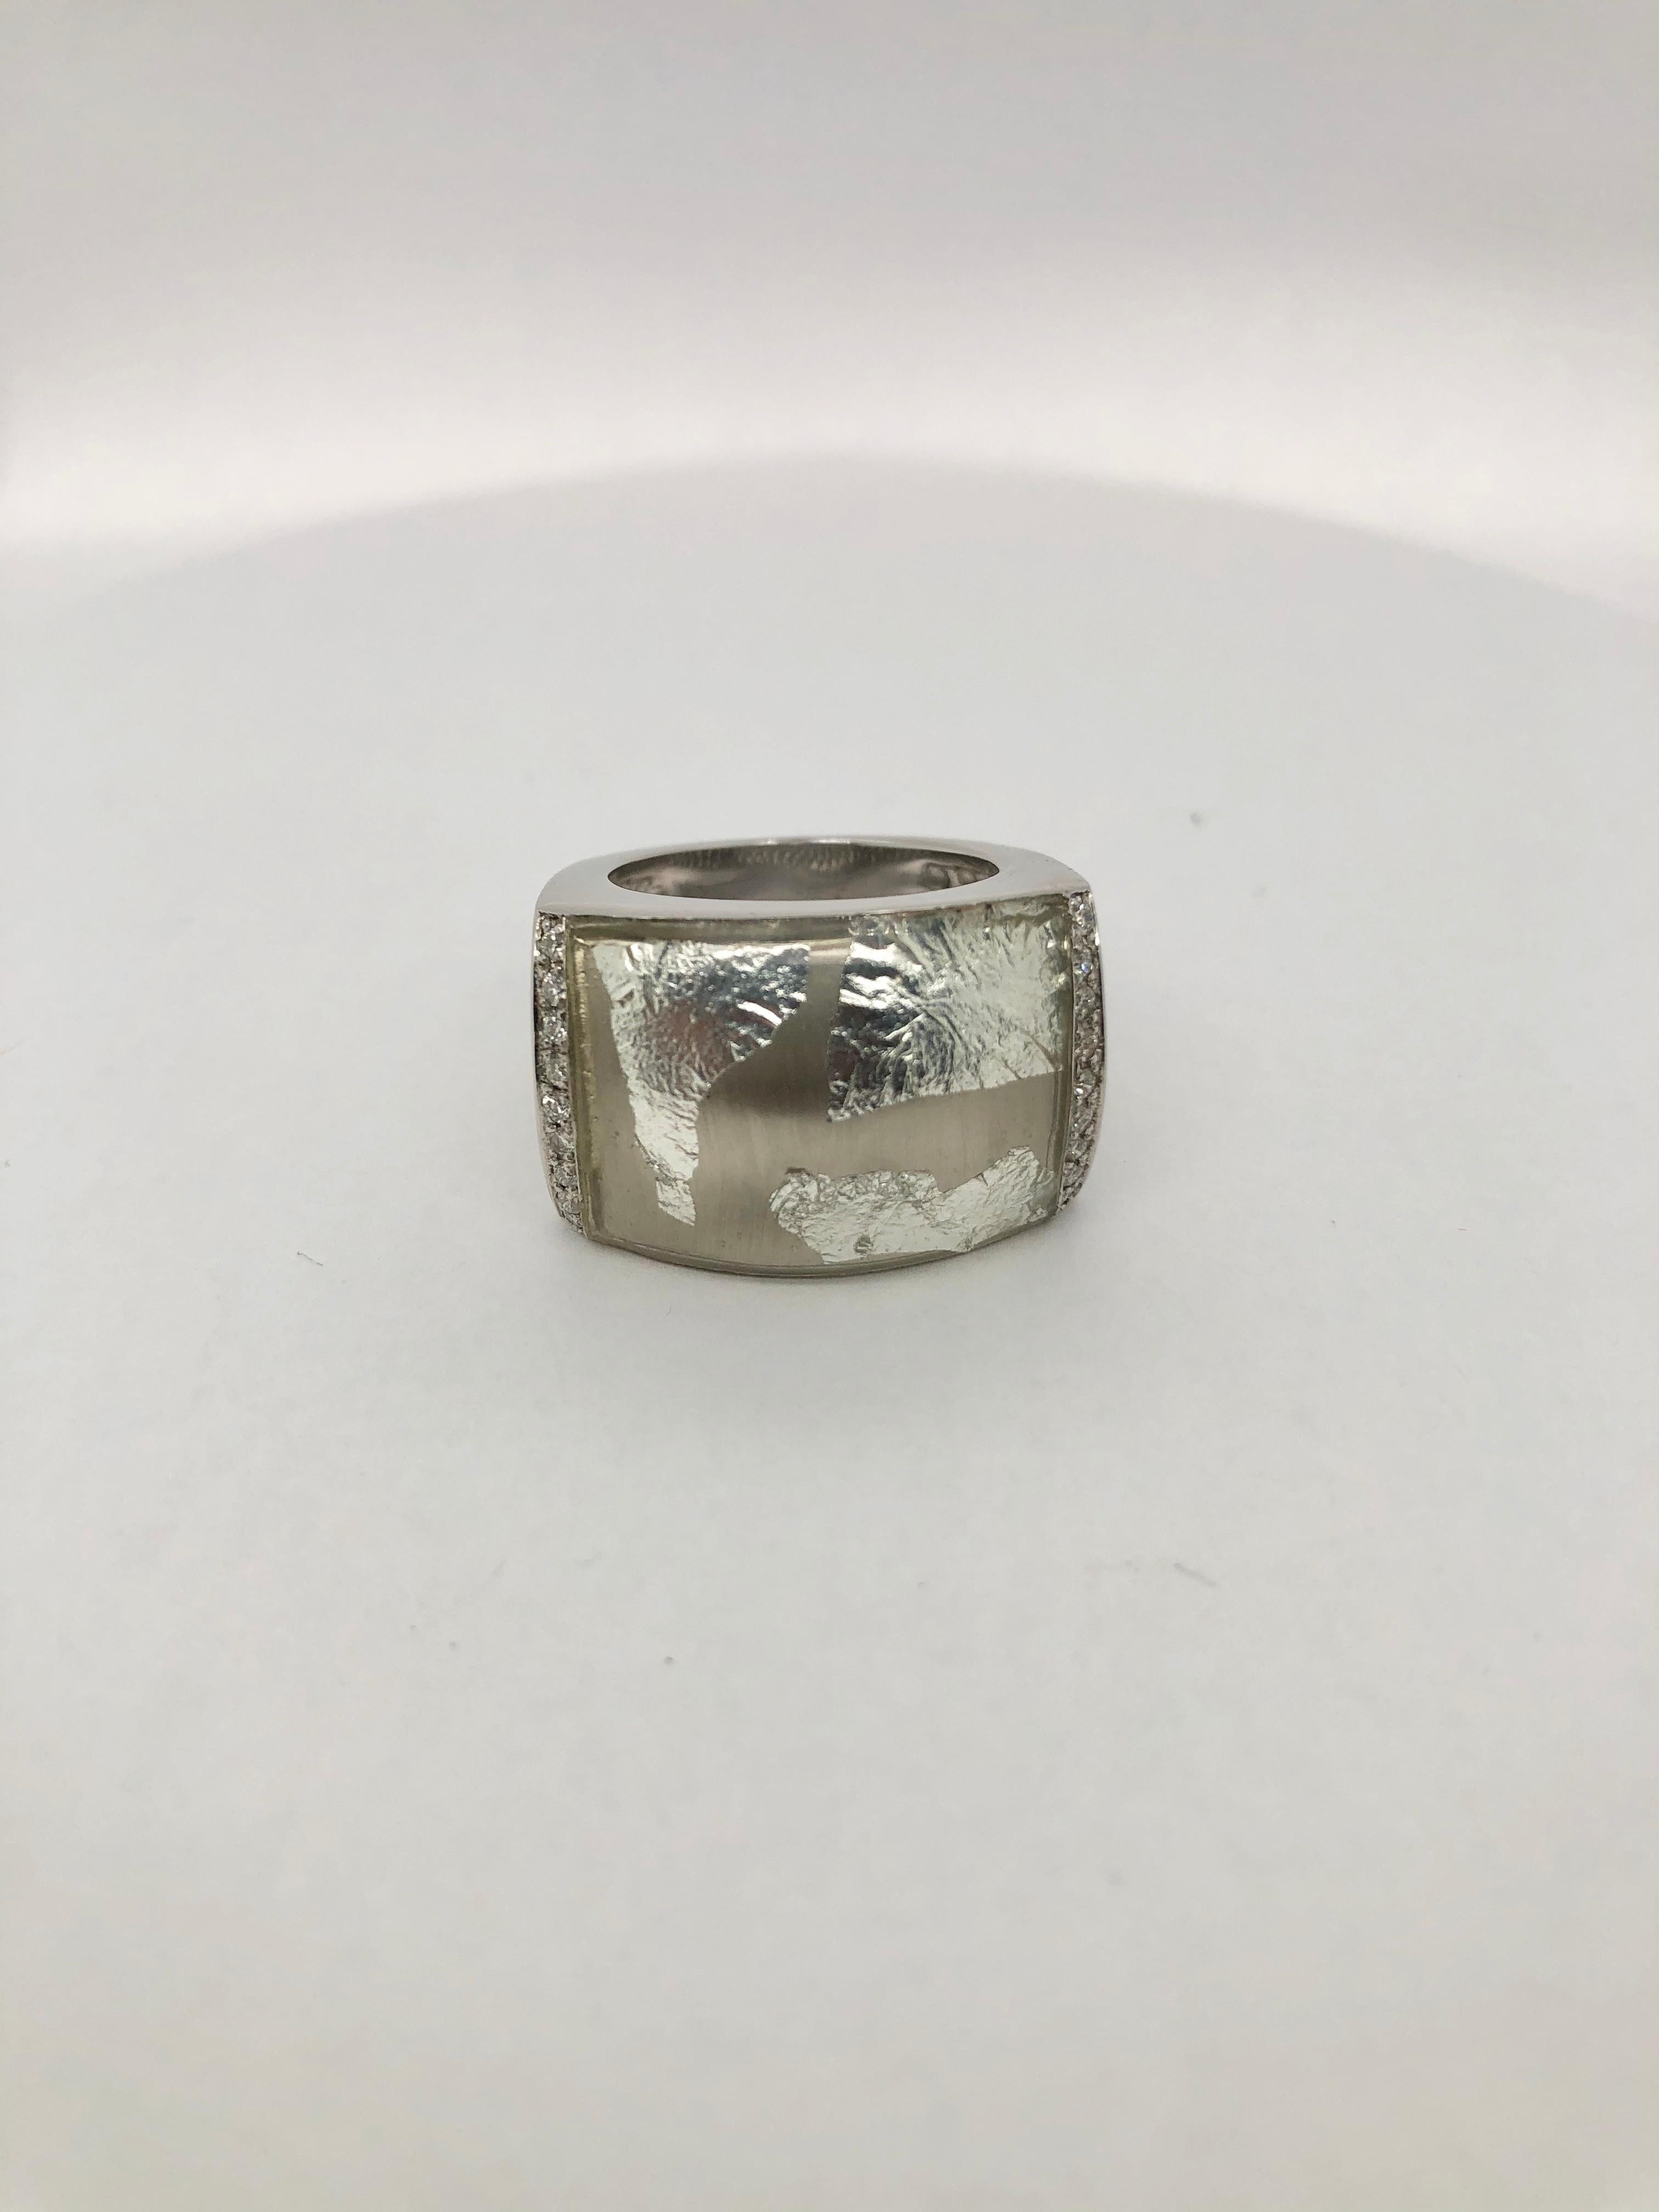 SOHO Sterling Silver Ring with White Gold Leaf and .18ctw of Diamonds. Handmade in Italy. Size 7. Stamped SOHO SLVR ITALY 925